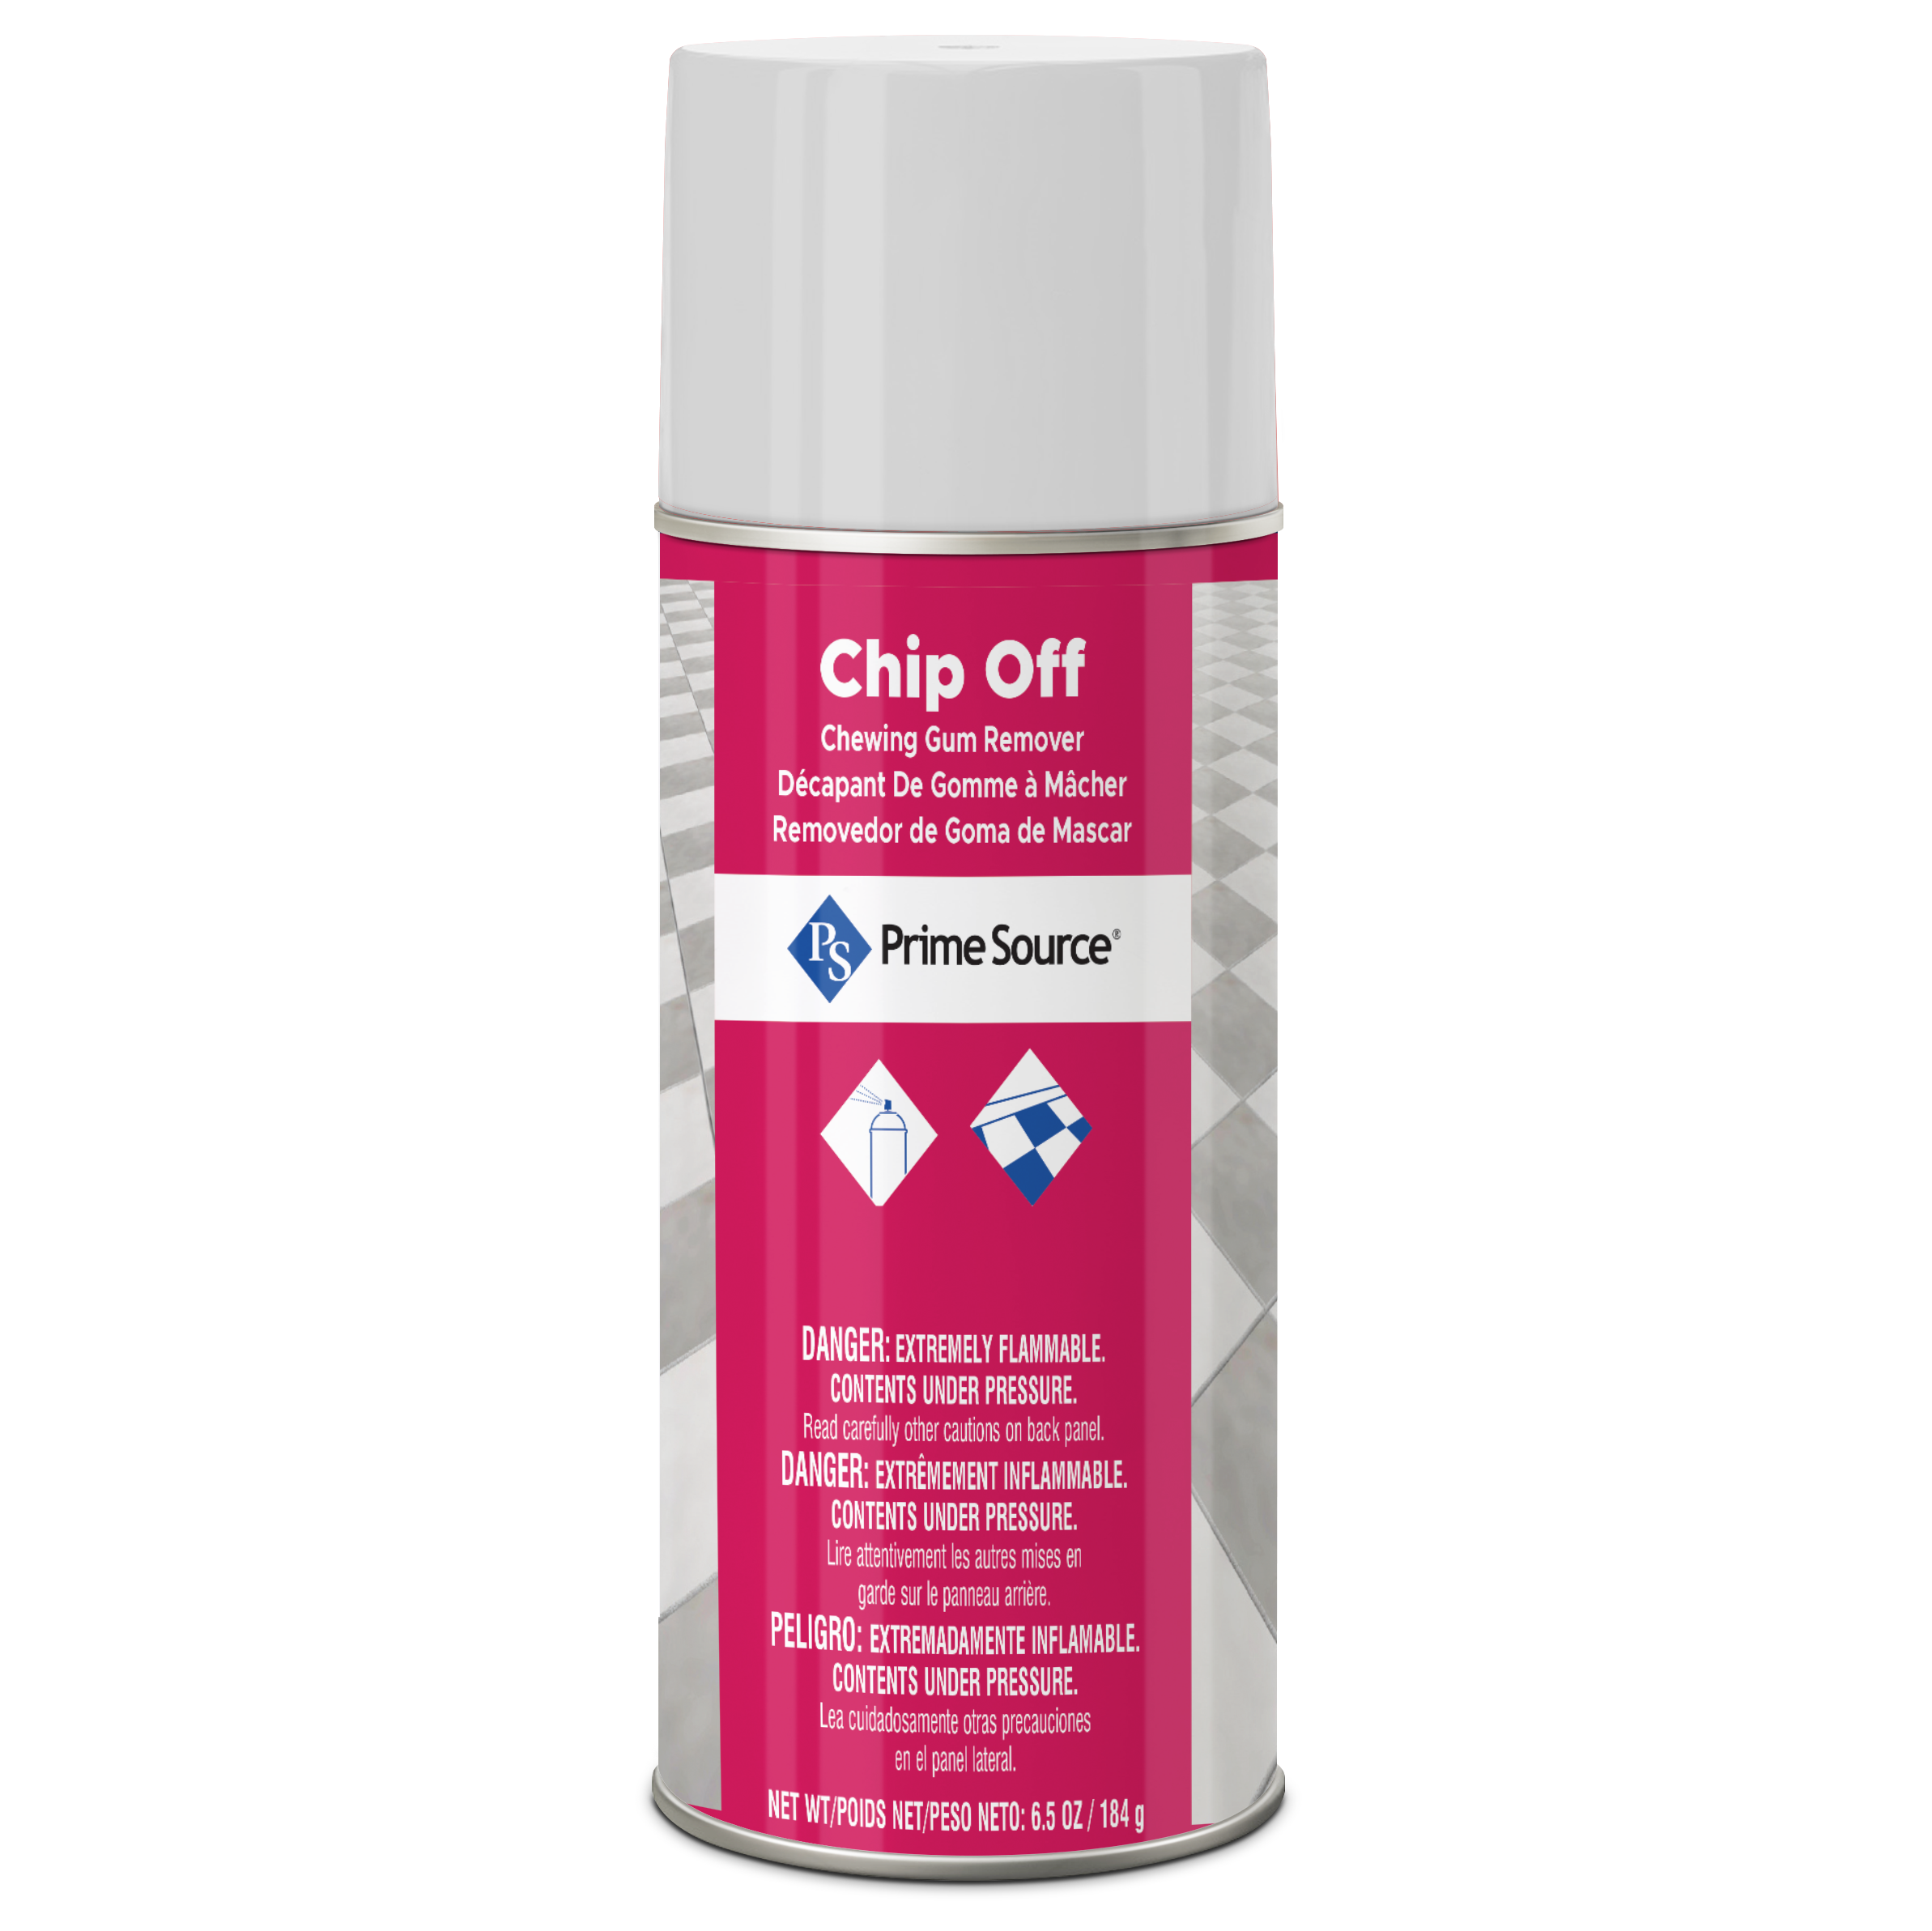 6.5 oz 'Chip-Off' Chewing Gum Remover Aerosol – Prime Source Brands